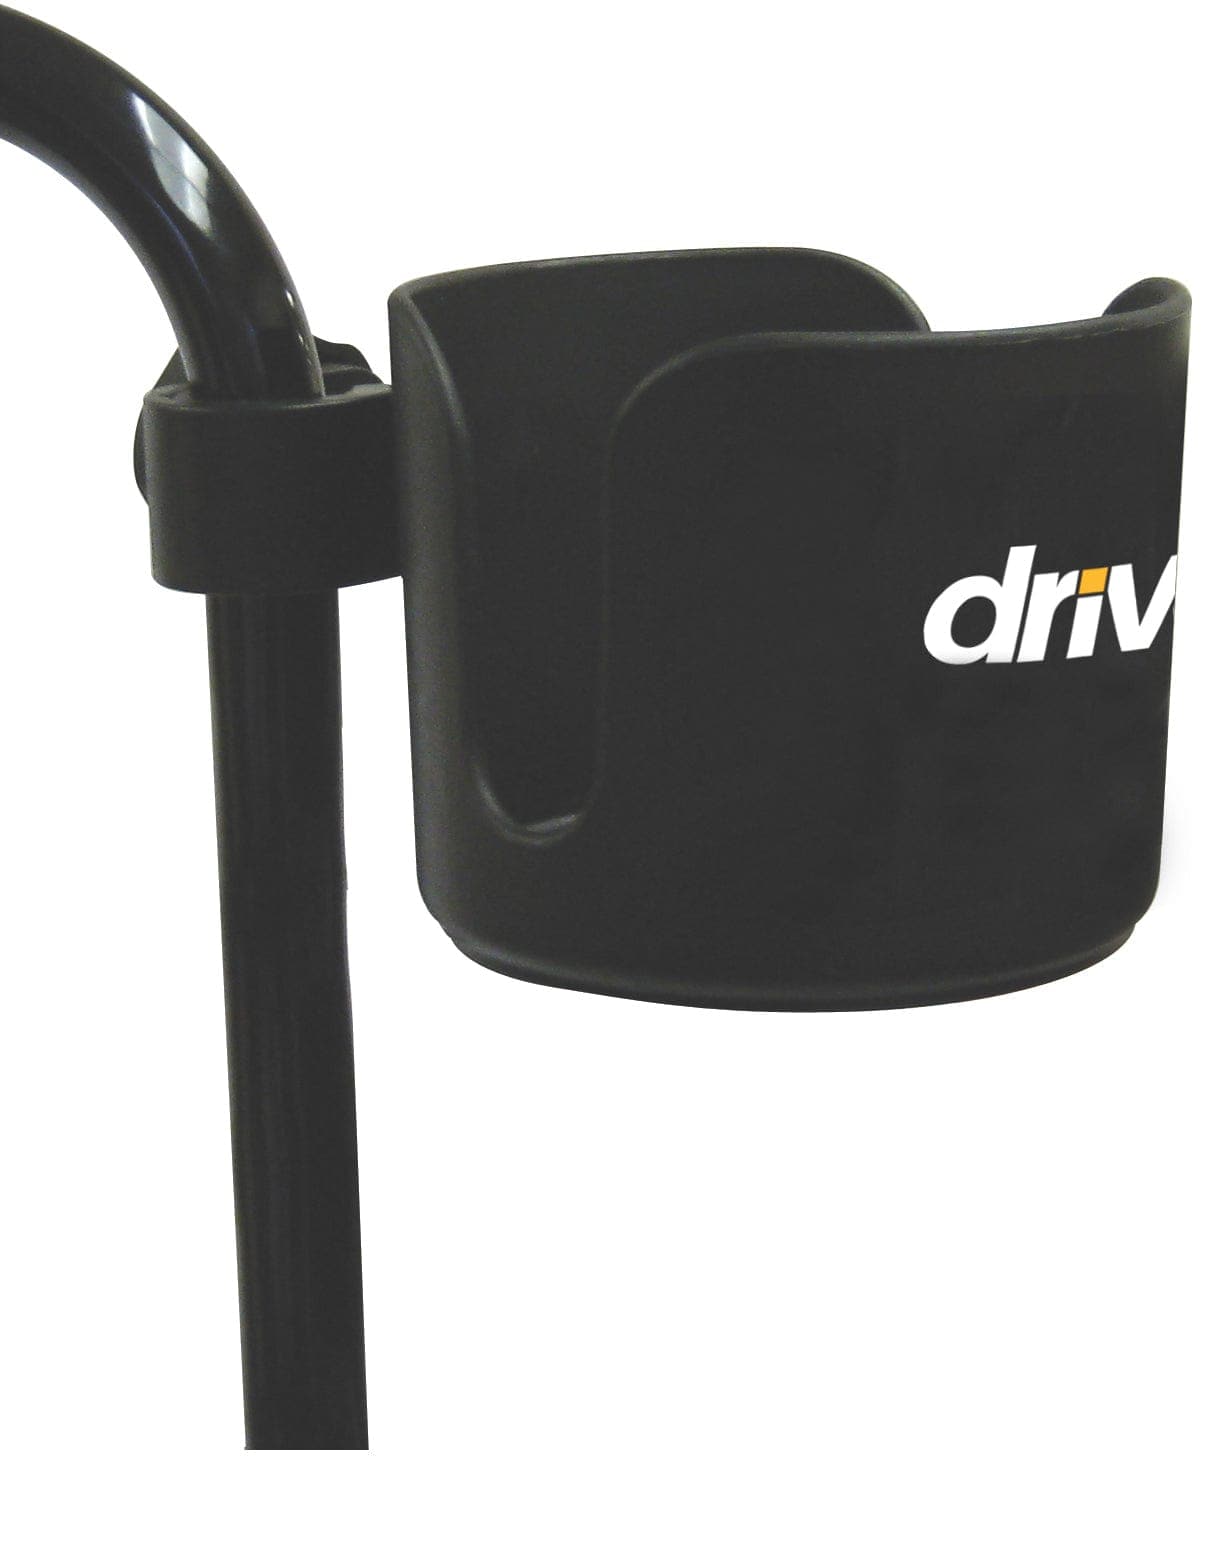 Drive Medical Drive Medical Universal Cup Holder stds1040s